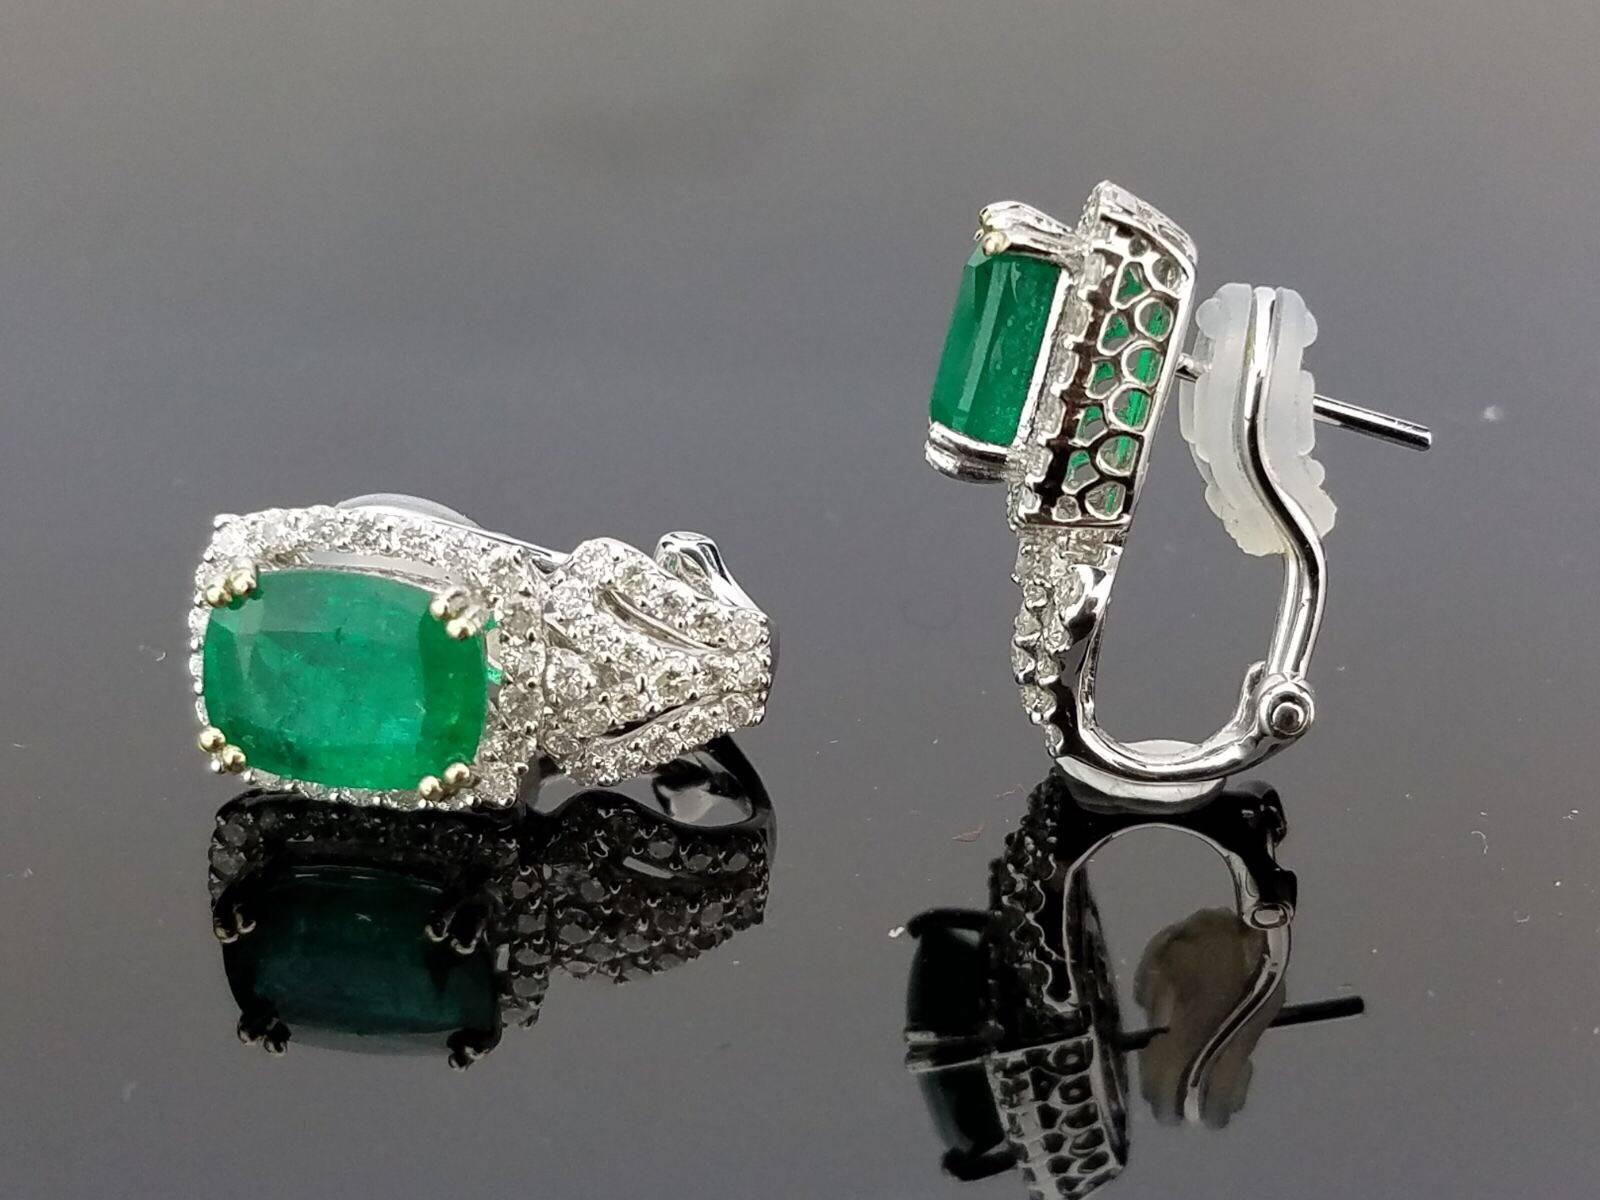 Elegant Emerald earrings with omega backing, embellished with white diamonds all set in 18K white gold. 

Stone Details:  
Stone: Zambian Emerald
Cut: Emerald cut
Carat weight:  4.07 carat

Diamond Details:
Cut: Brilliant (round)
Total Carat Weight: